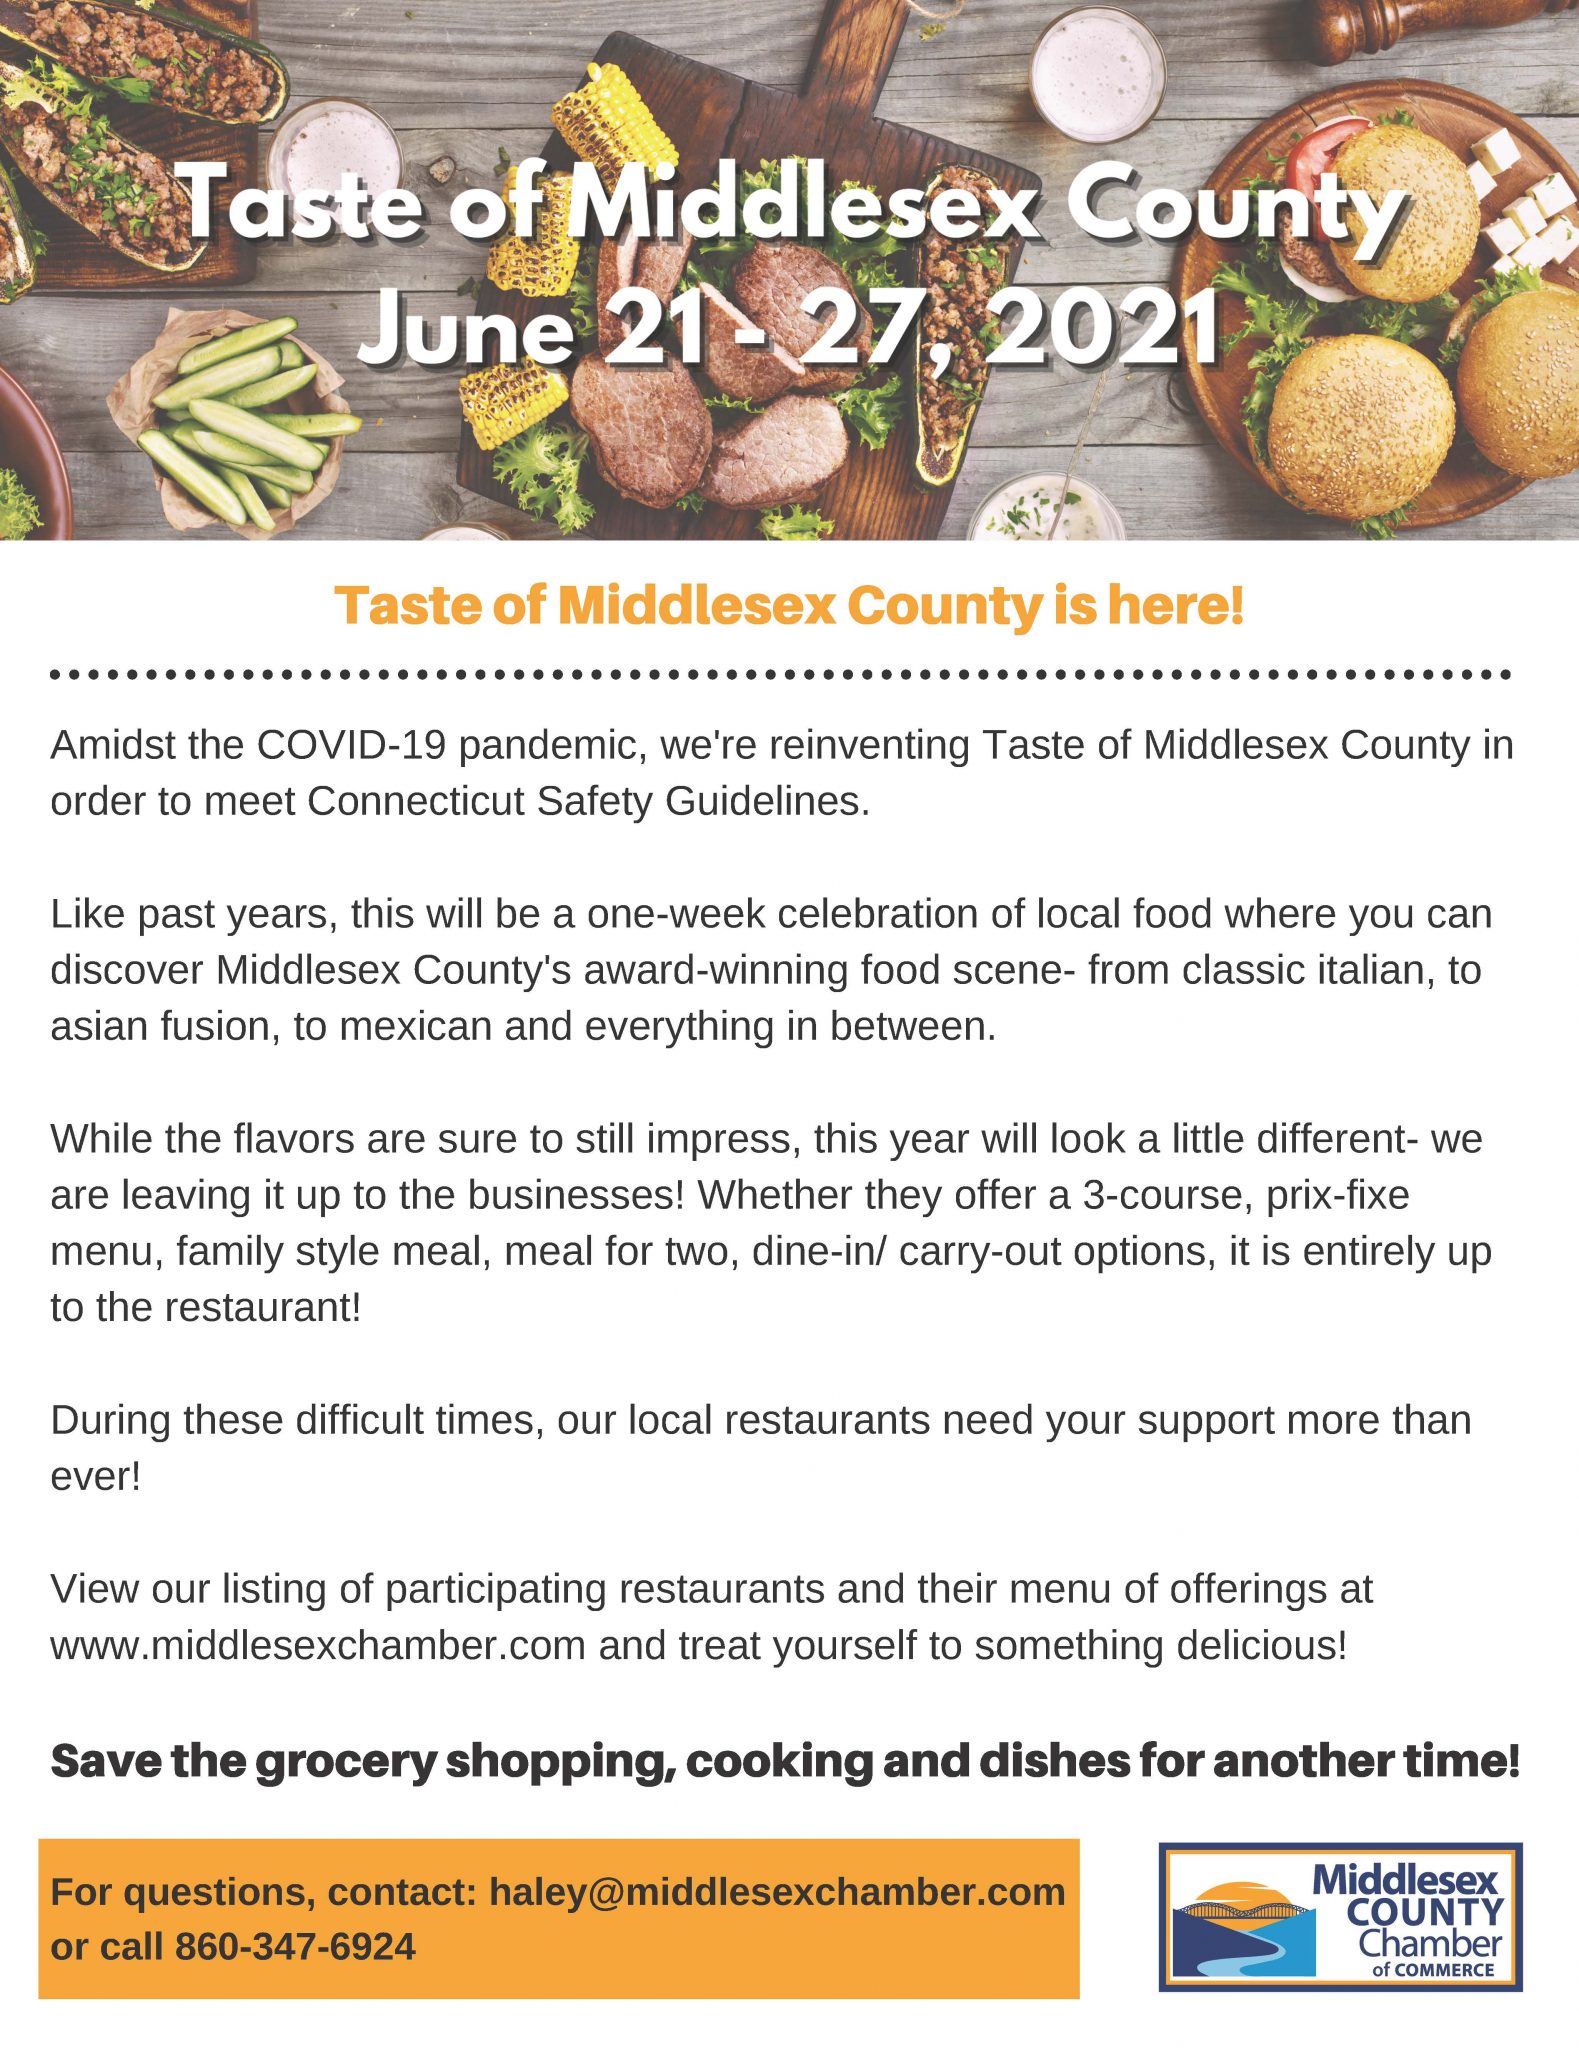 Taste of Middlesex County Middlesex County Chamber of Commerce